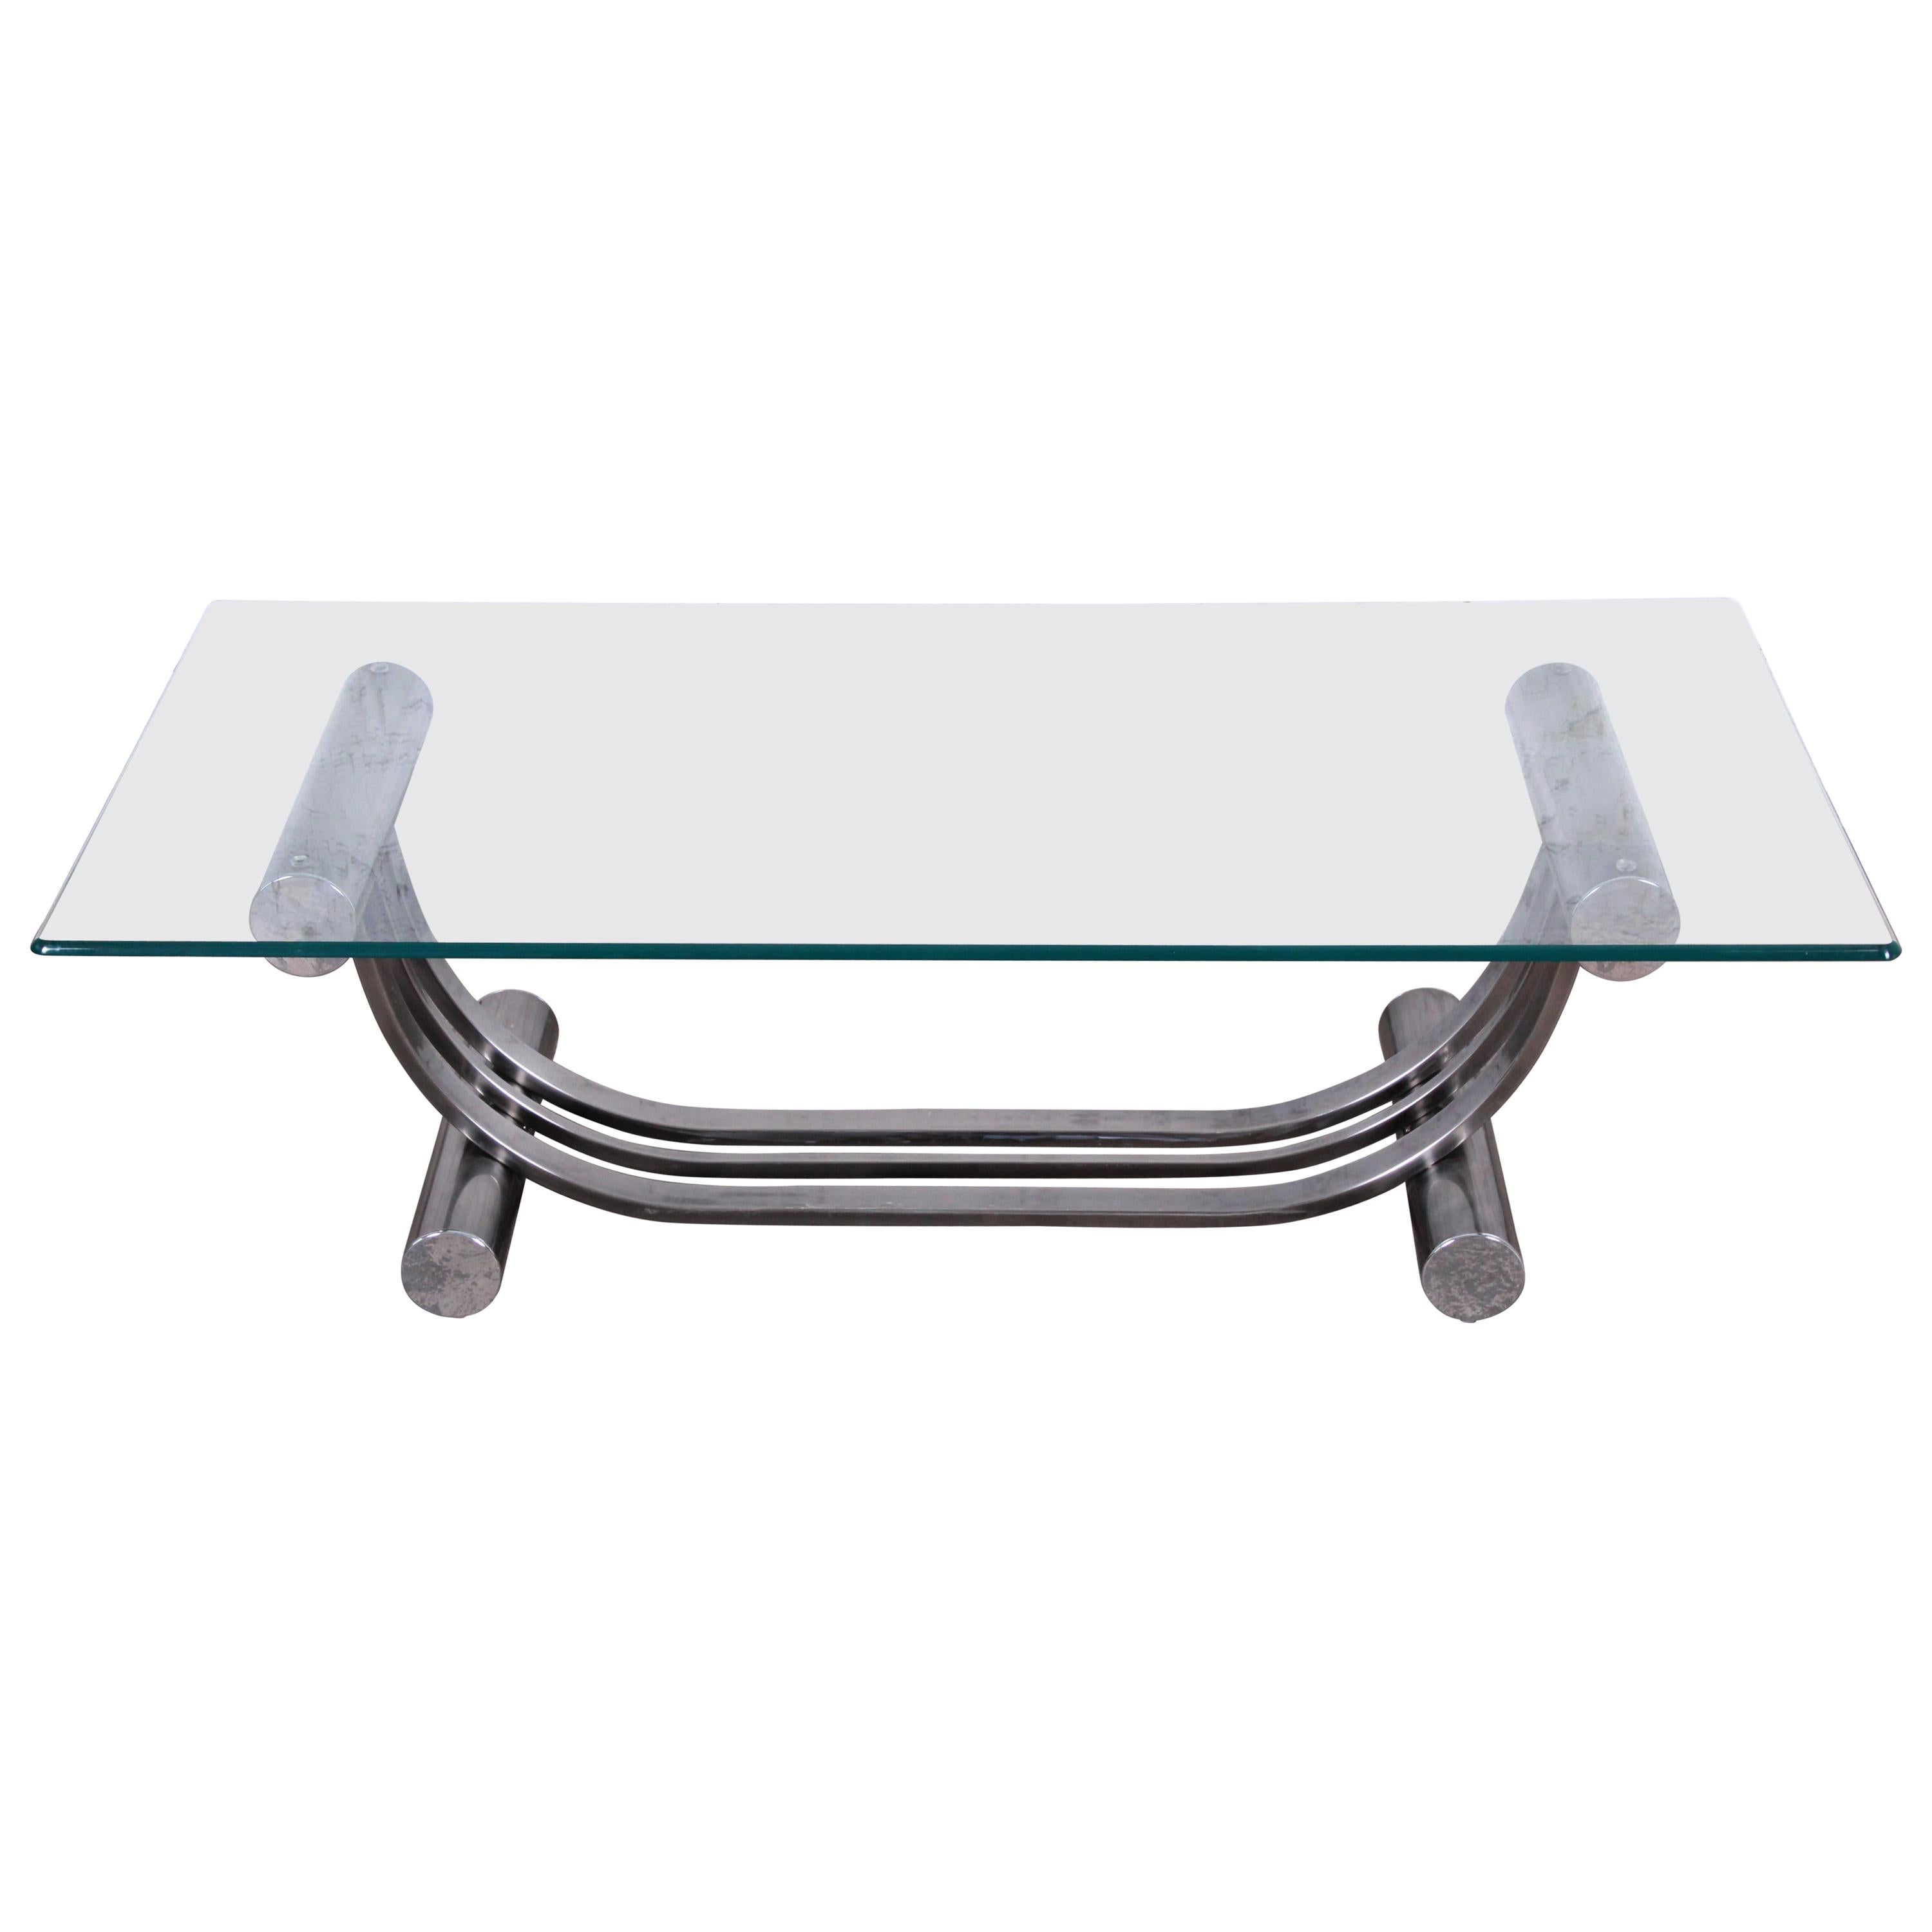 Design Institute America Art Deco Style Chrome and Glass Coffee Table